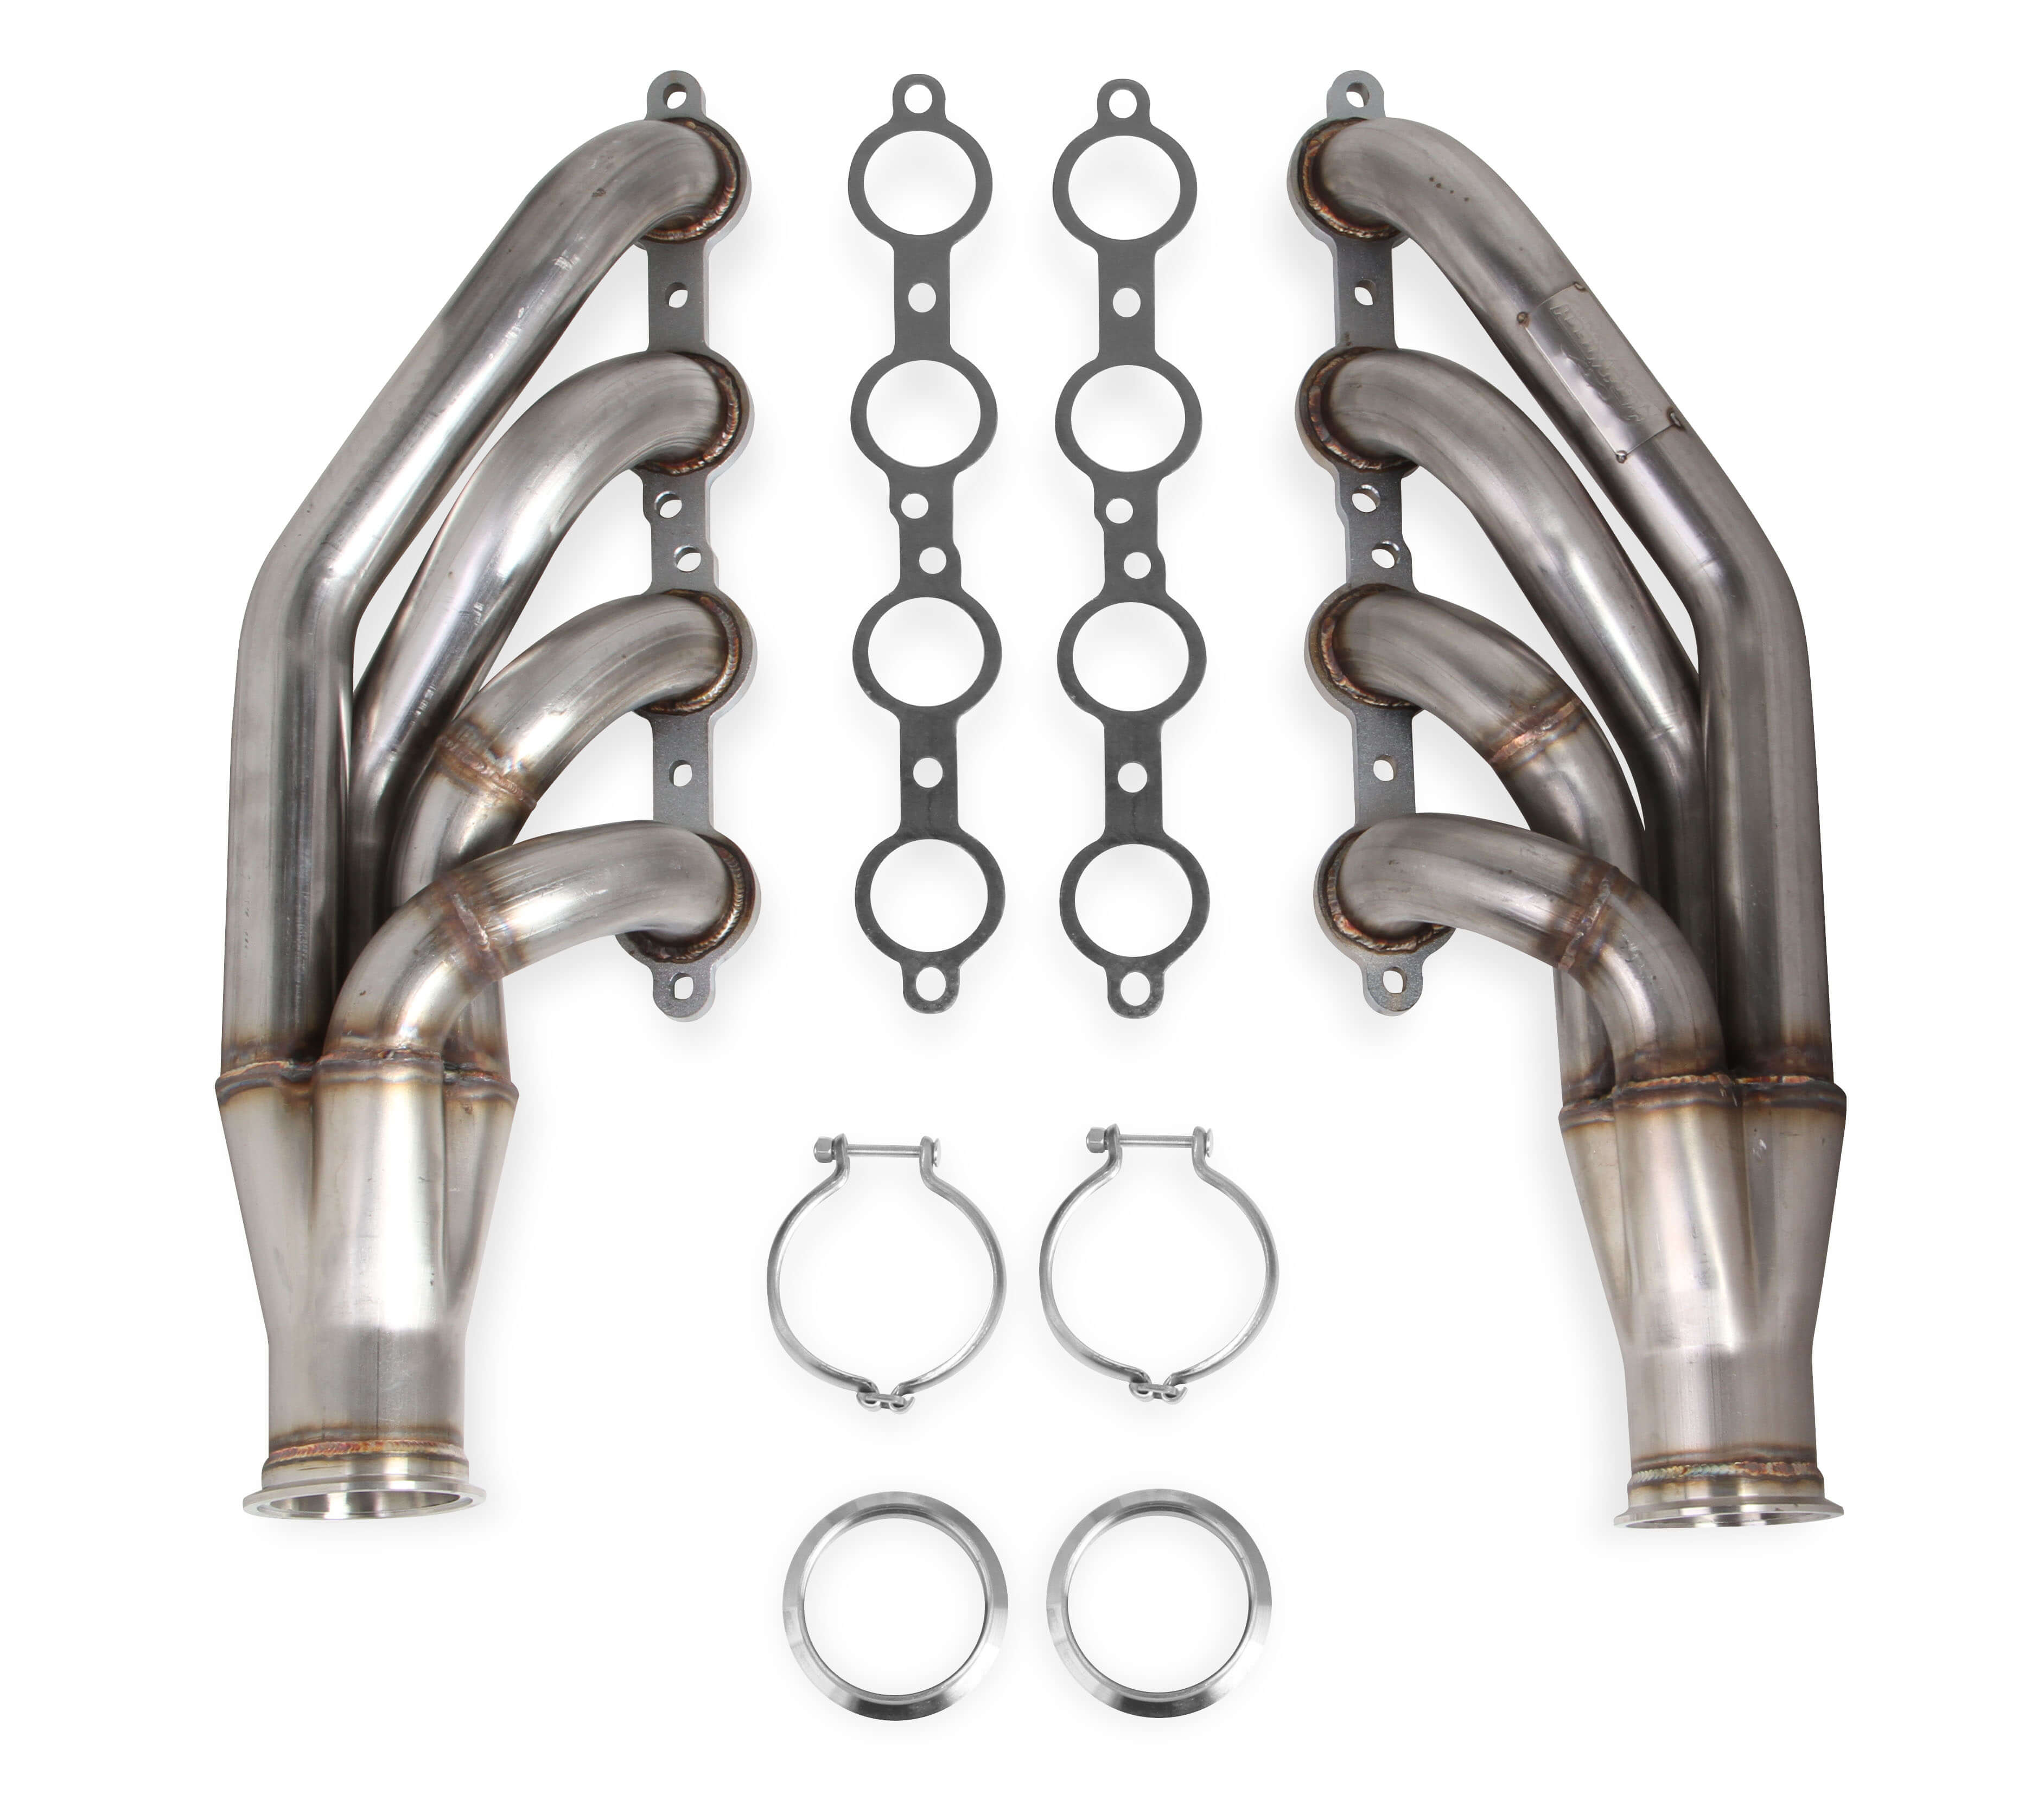 LS Flowtech Turbo Headers (Up and forward) (Natural Finish)